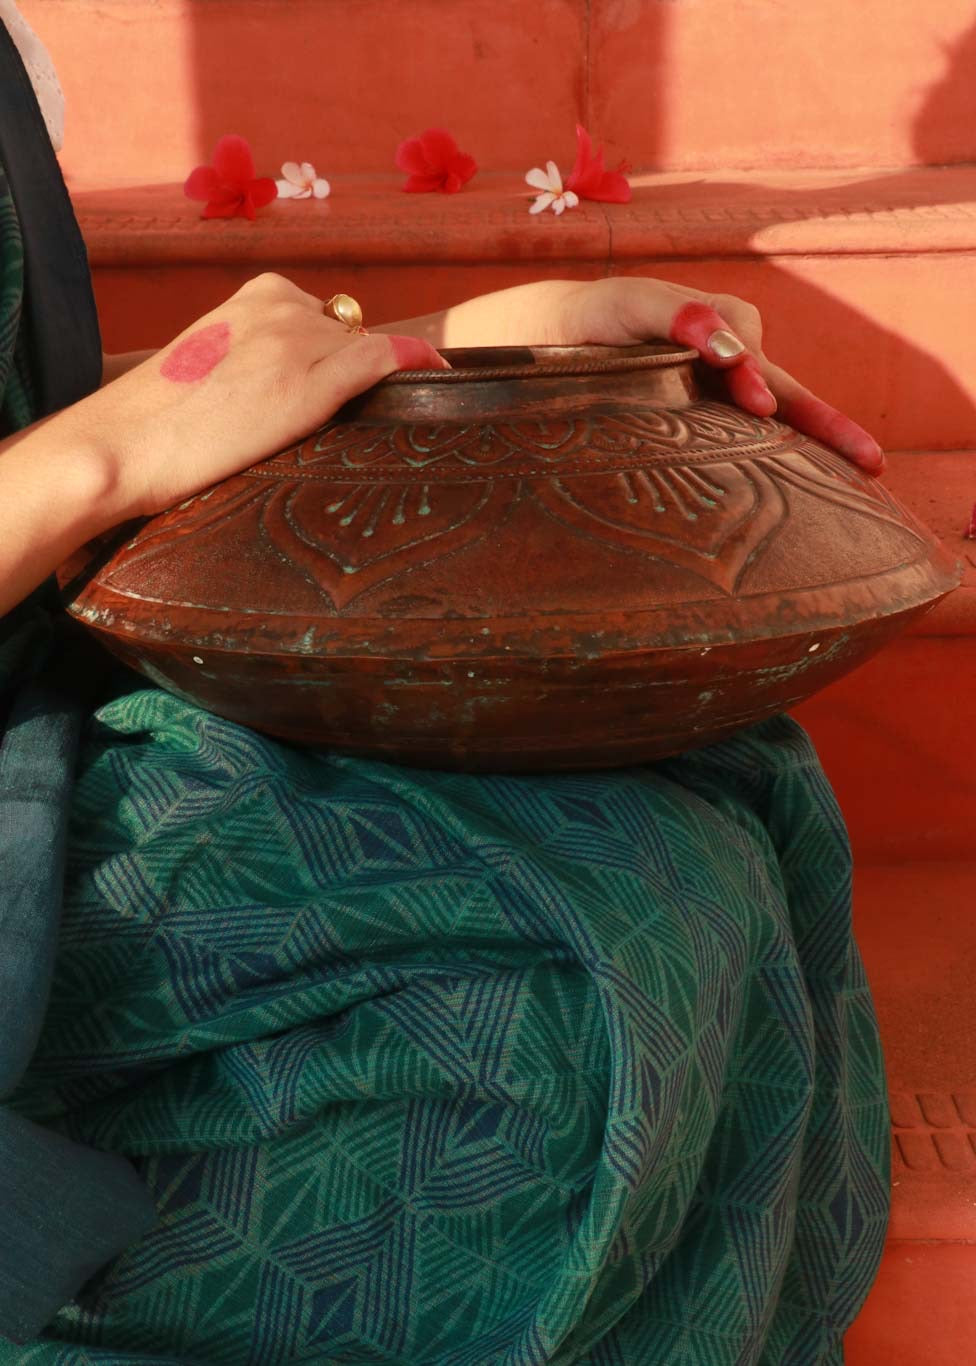 Copper embossed Vase on a woman's lap while she holds it